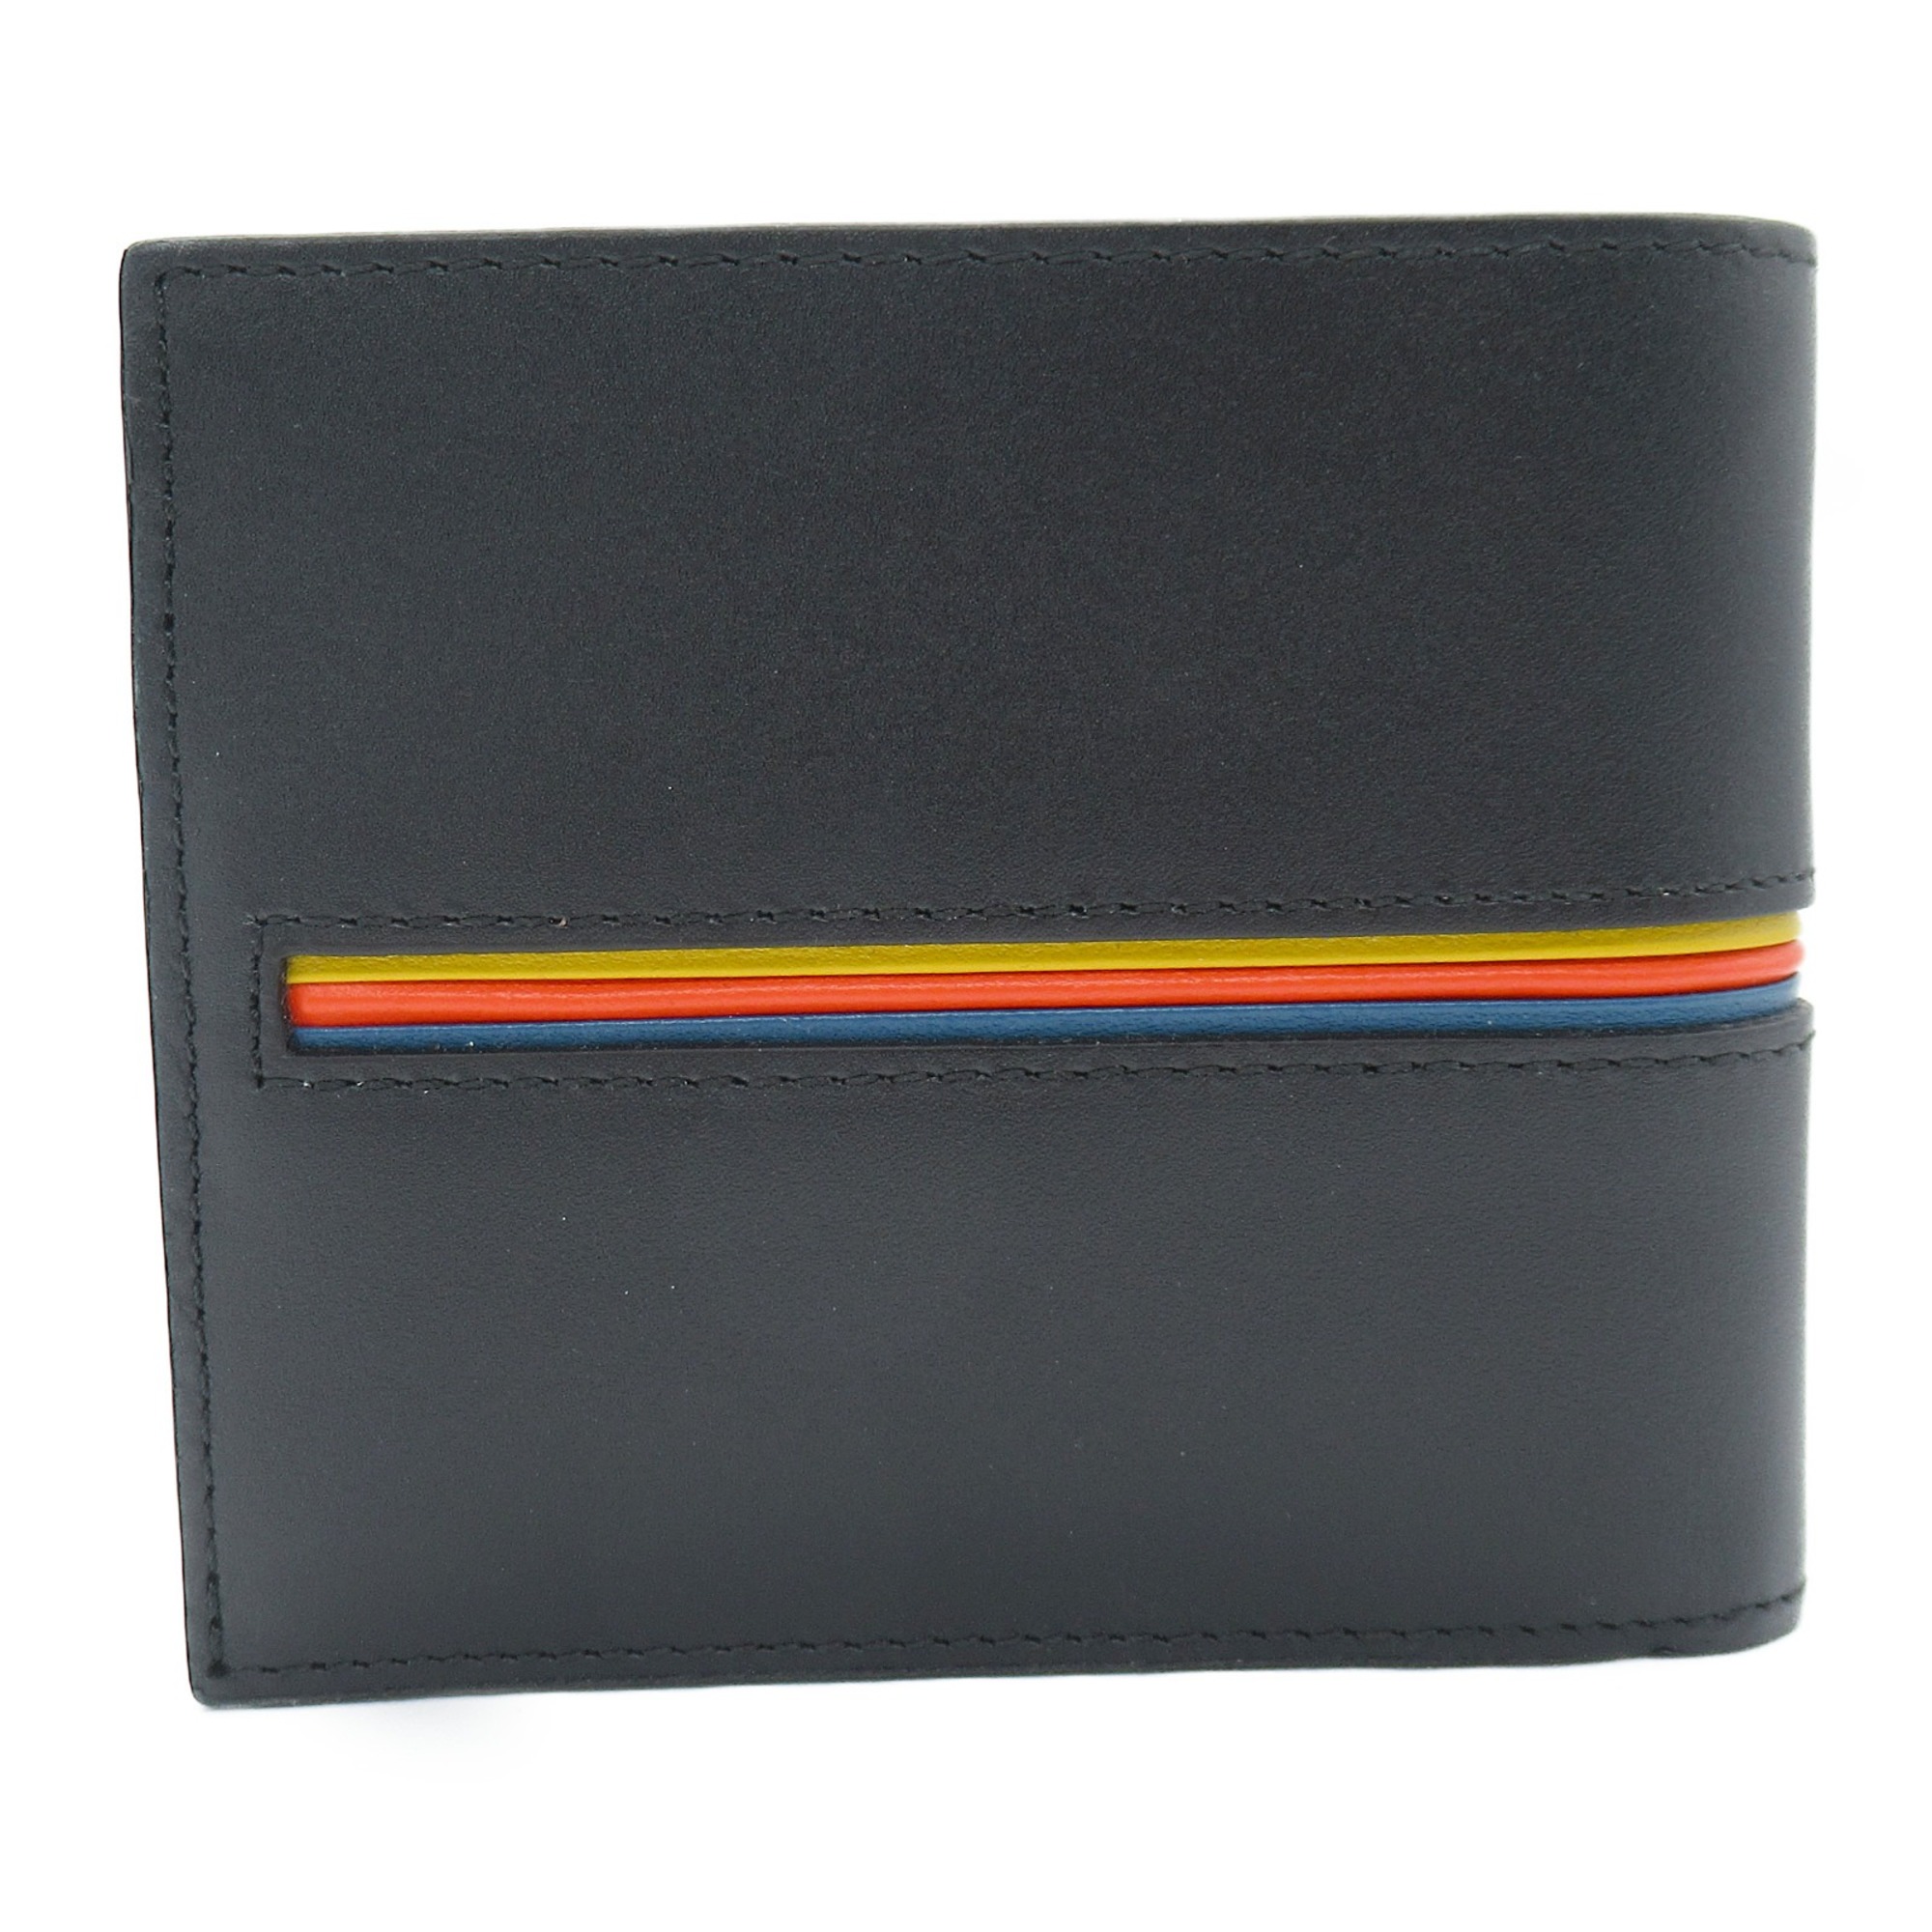 Paul Smith wallet Black leather 483379